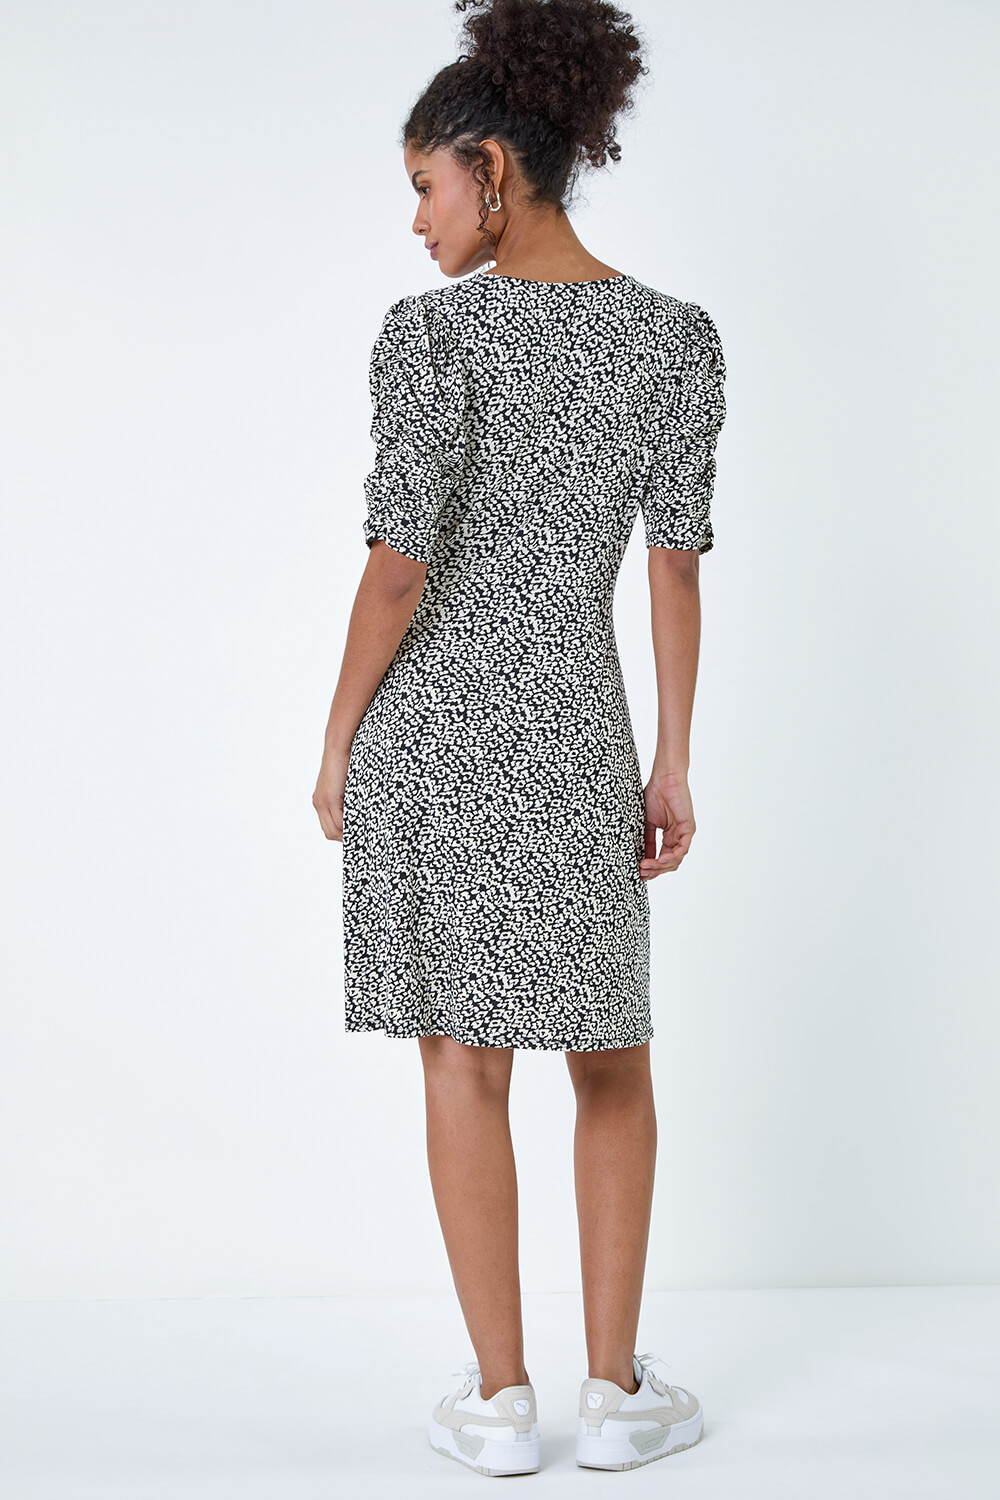 Black Ditsy Floral Ruched Puff Sleeve Dress, Image 3 of 5